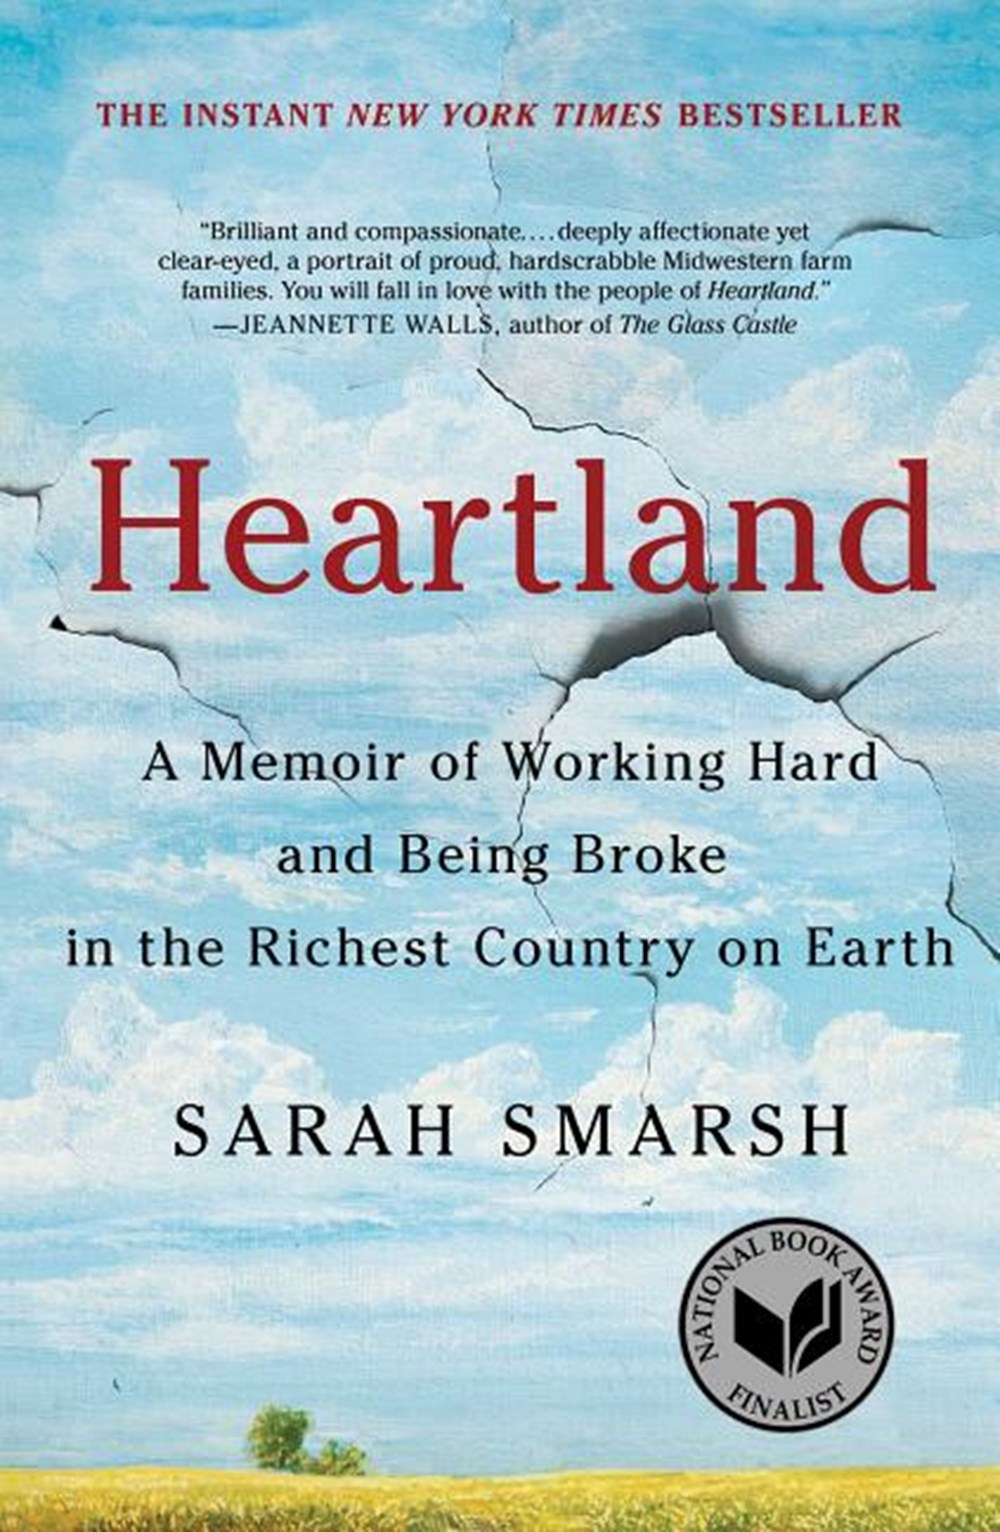 Heartland A Memoir of Working Hard and Being Broke in the Richest Country on Earth